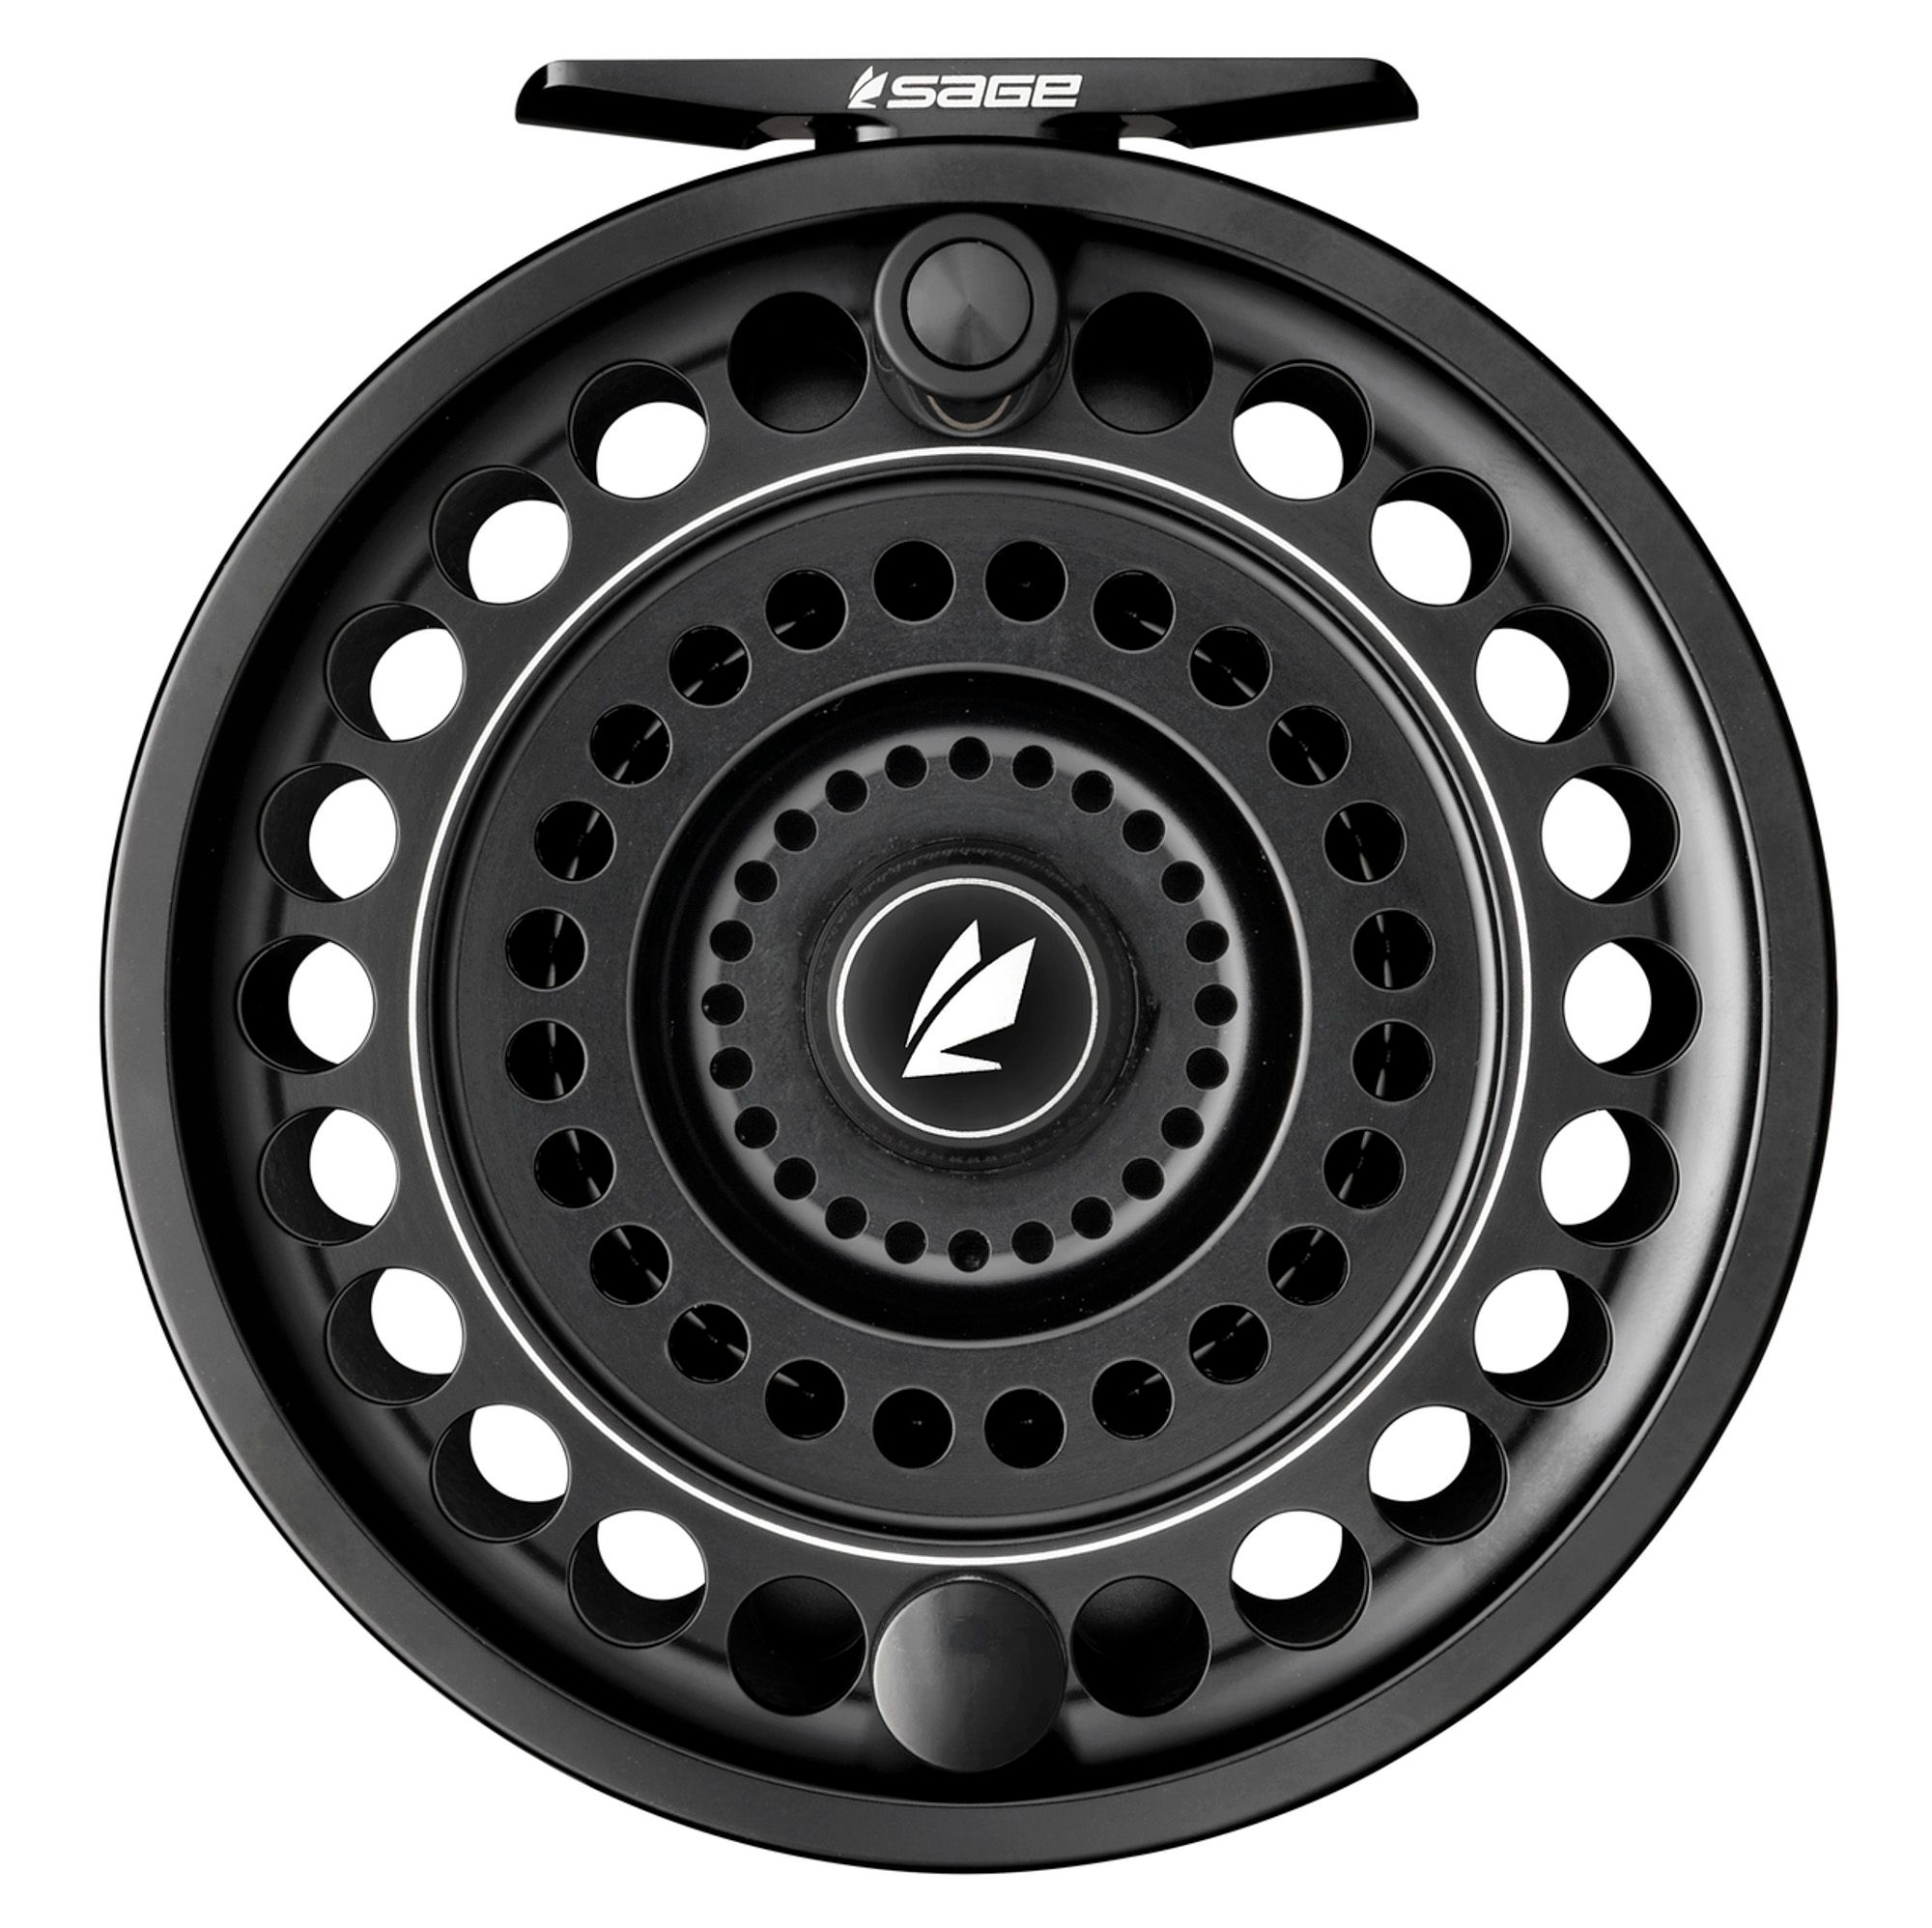 Sage Spey II Fly Reel - Fin & Game